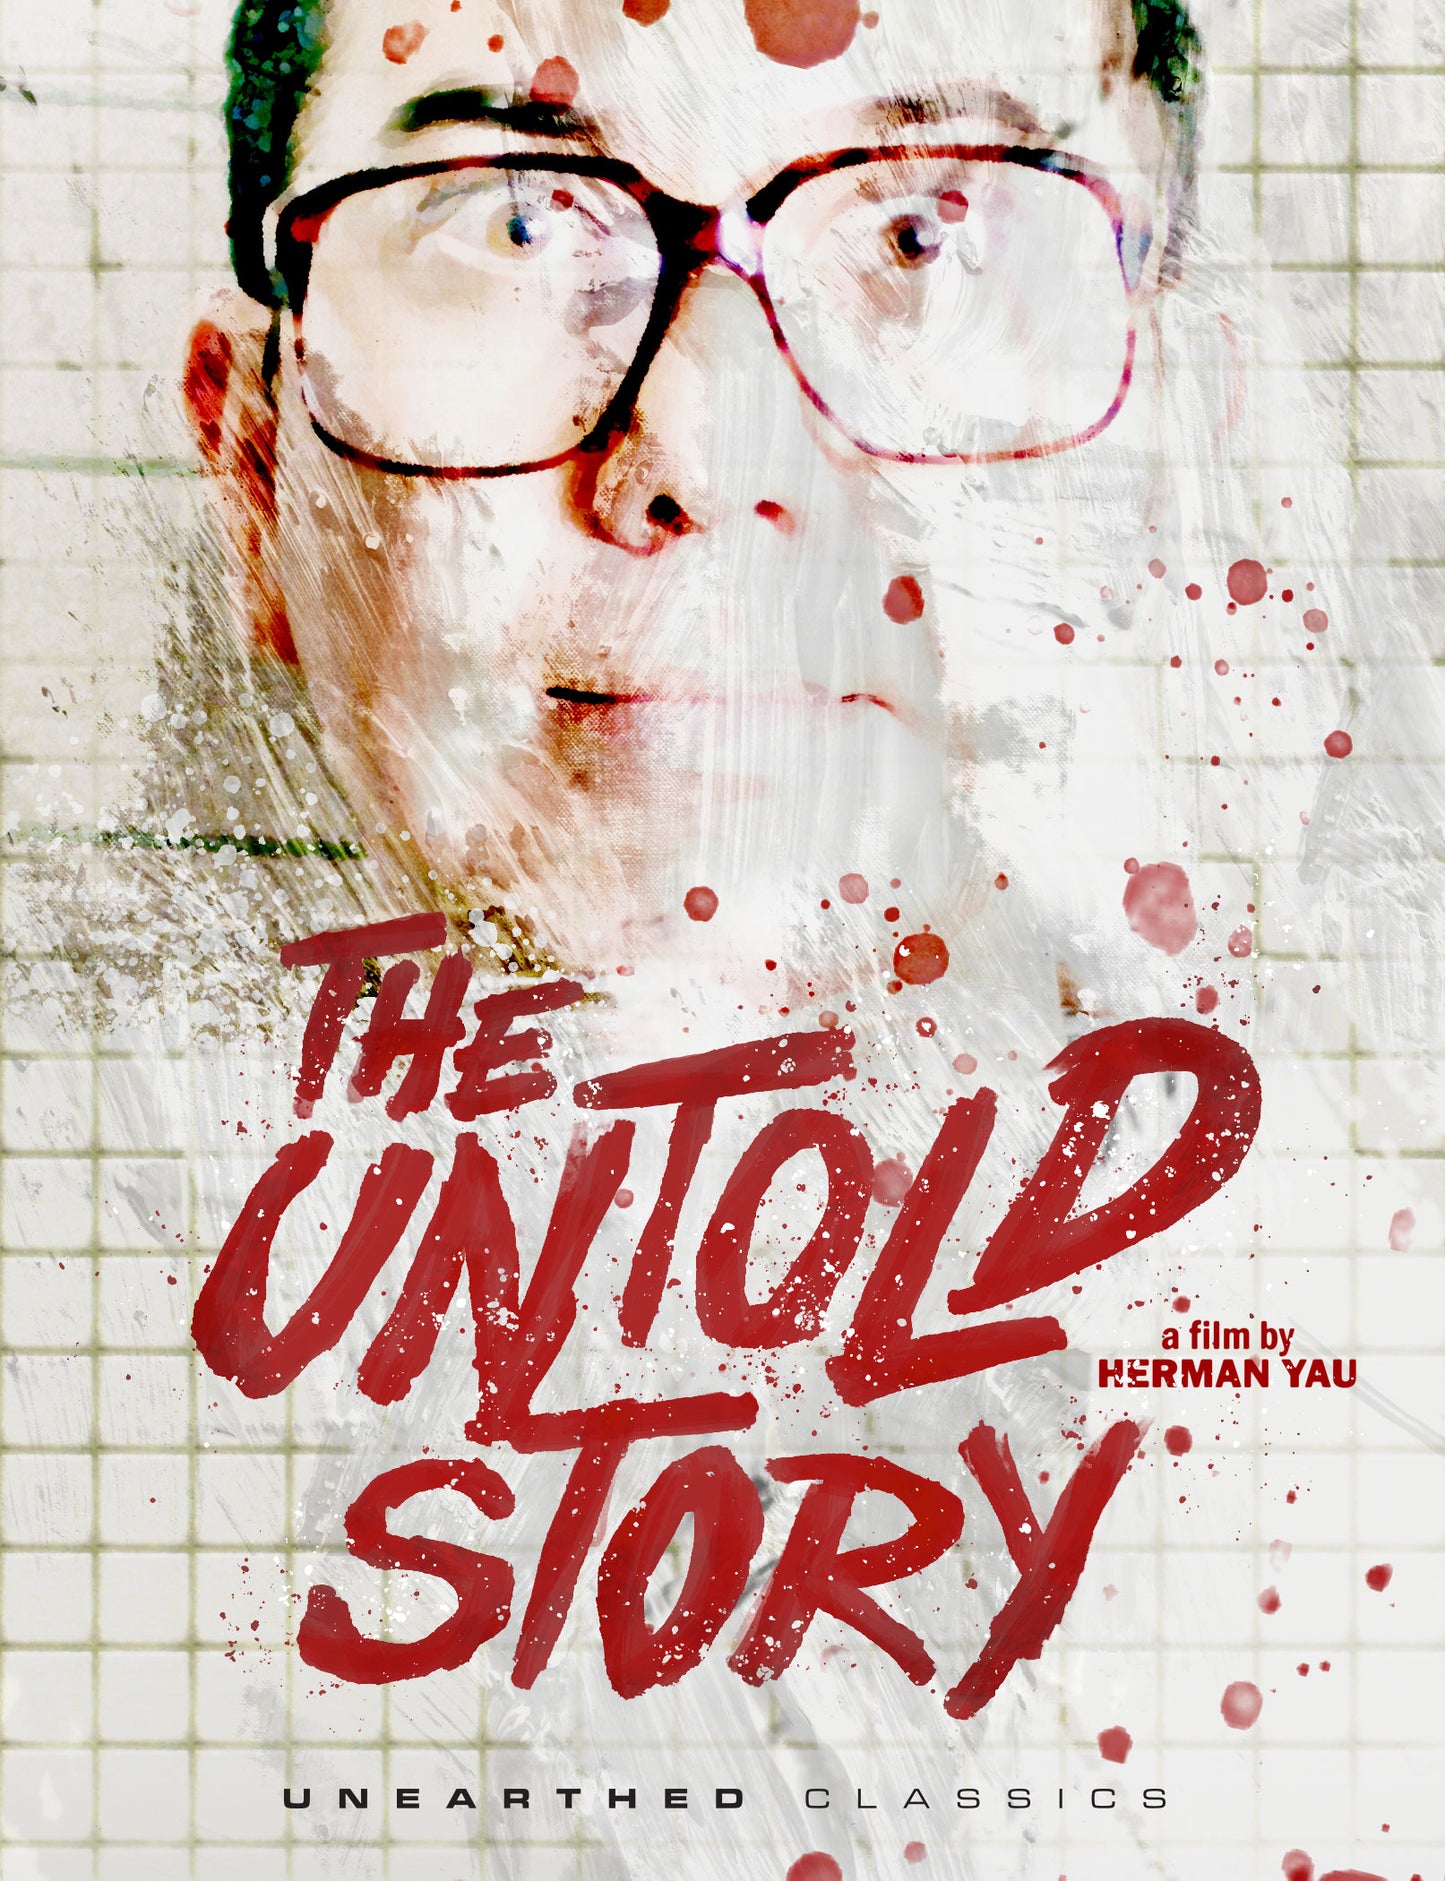 Untold Story [Blu-ray] cover art